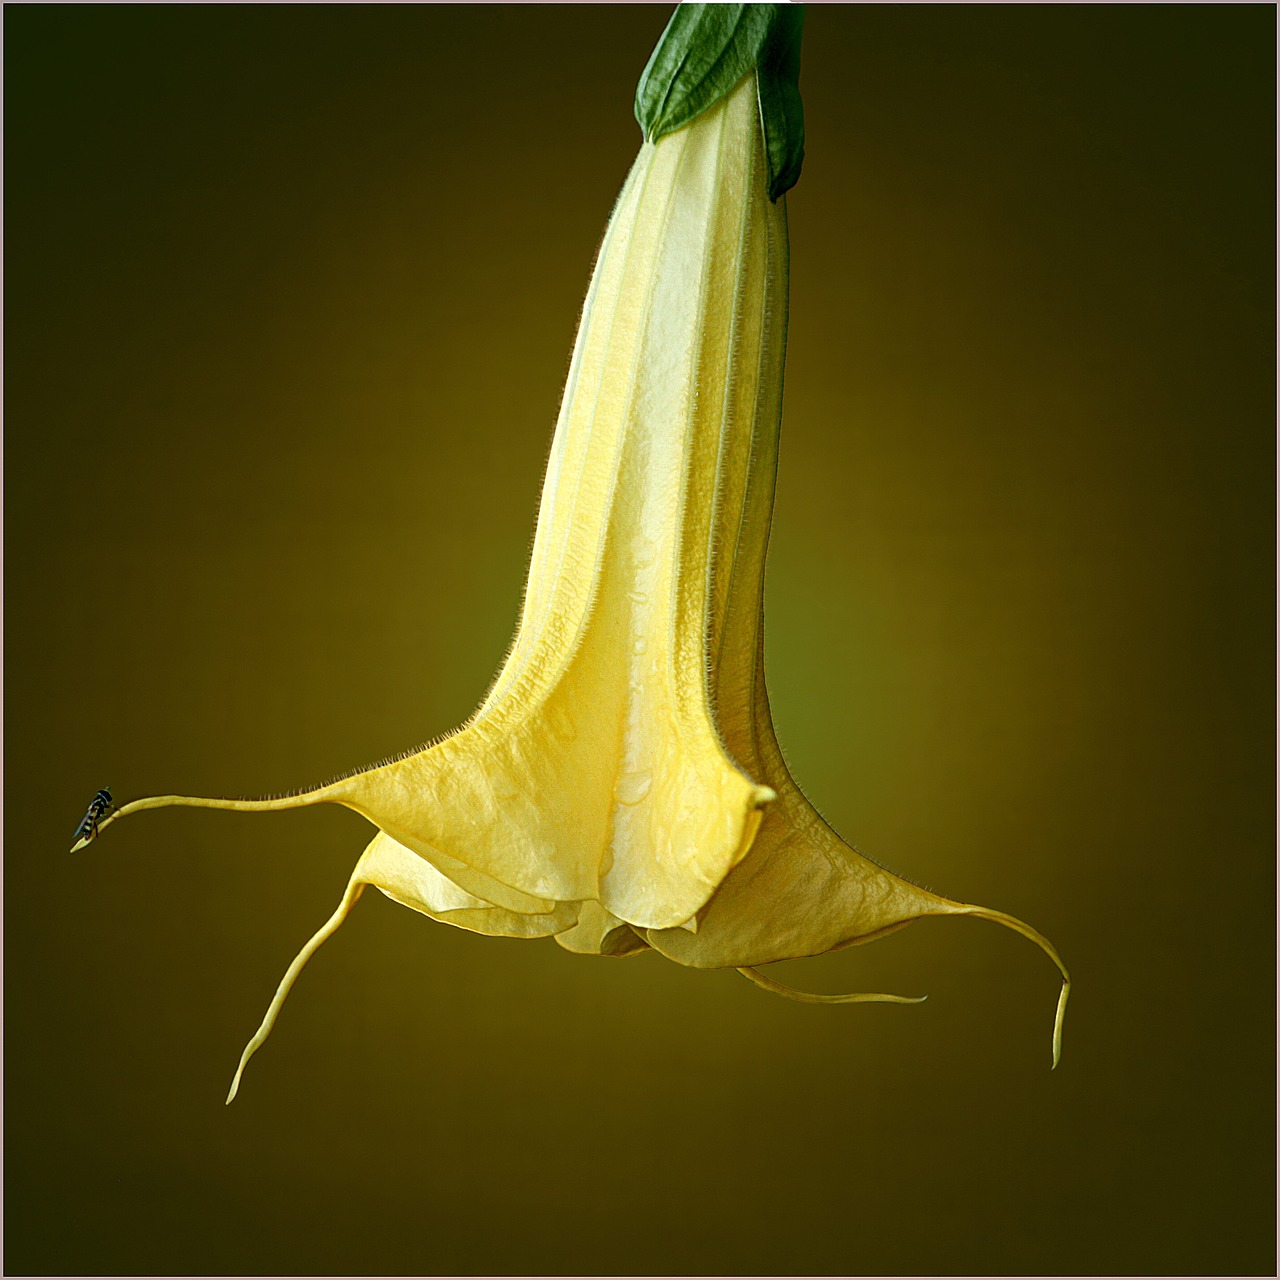 a close up of a yellow flower on a brown background, by Alison Geissler, angel's trumpet, professional fruit photography, ffffound, hanging upside down